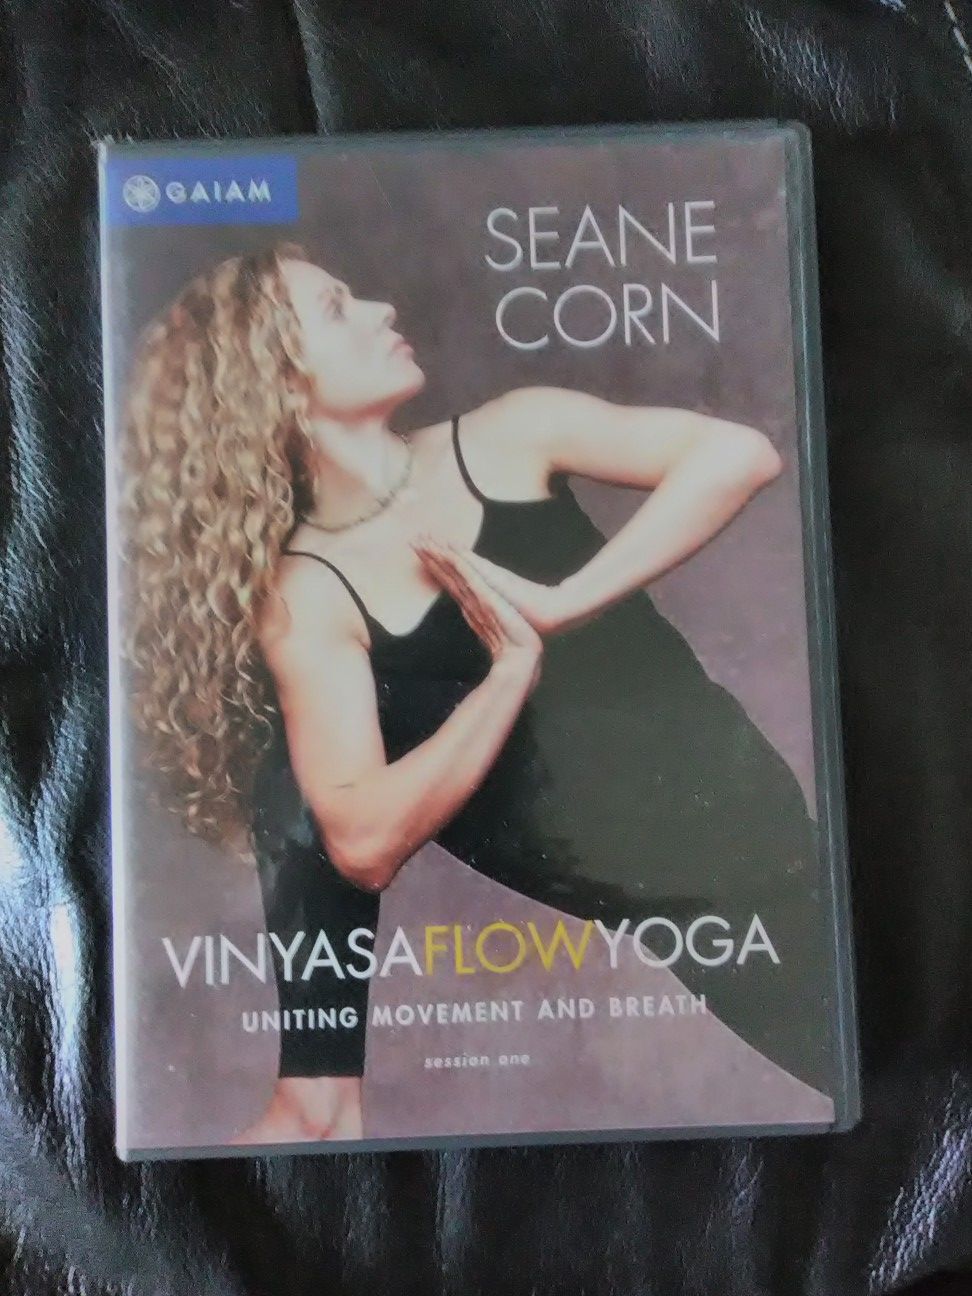 Purple yoga mat w/Sean Corn Flow Yoga lessons 1 and 2, on DVD and Yoga & Pilates on DVD. New Condition. Two DVD's in each Sean Corn case.